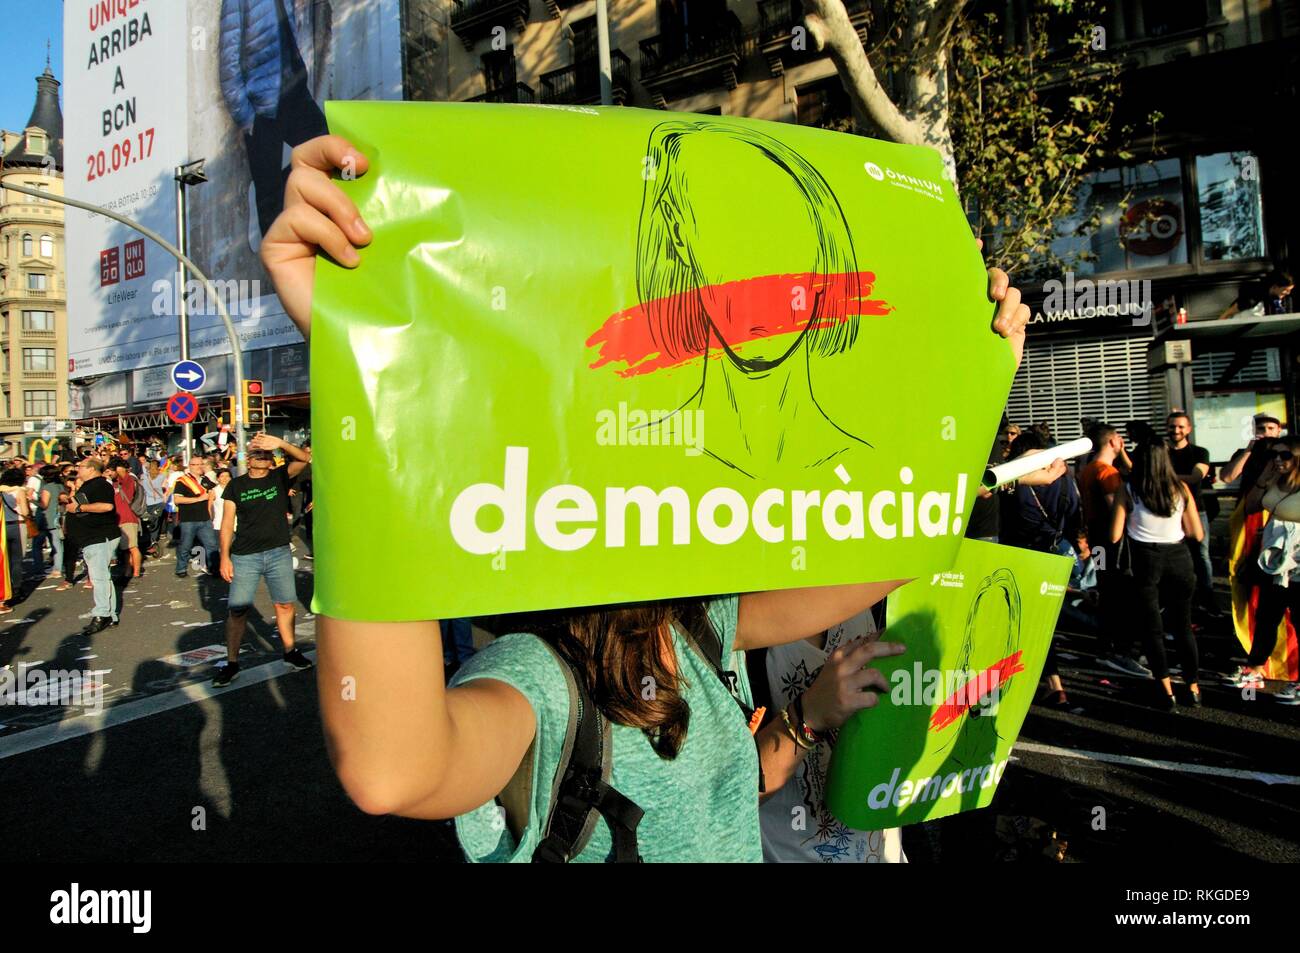 Political demonstration for the independence of Catalonia. Posters asking for democracy. October 2017. Barcelona, Catalonia, Spain Stock Photo